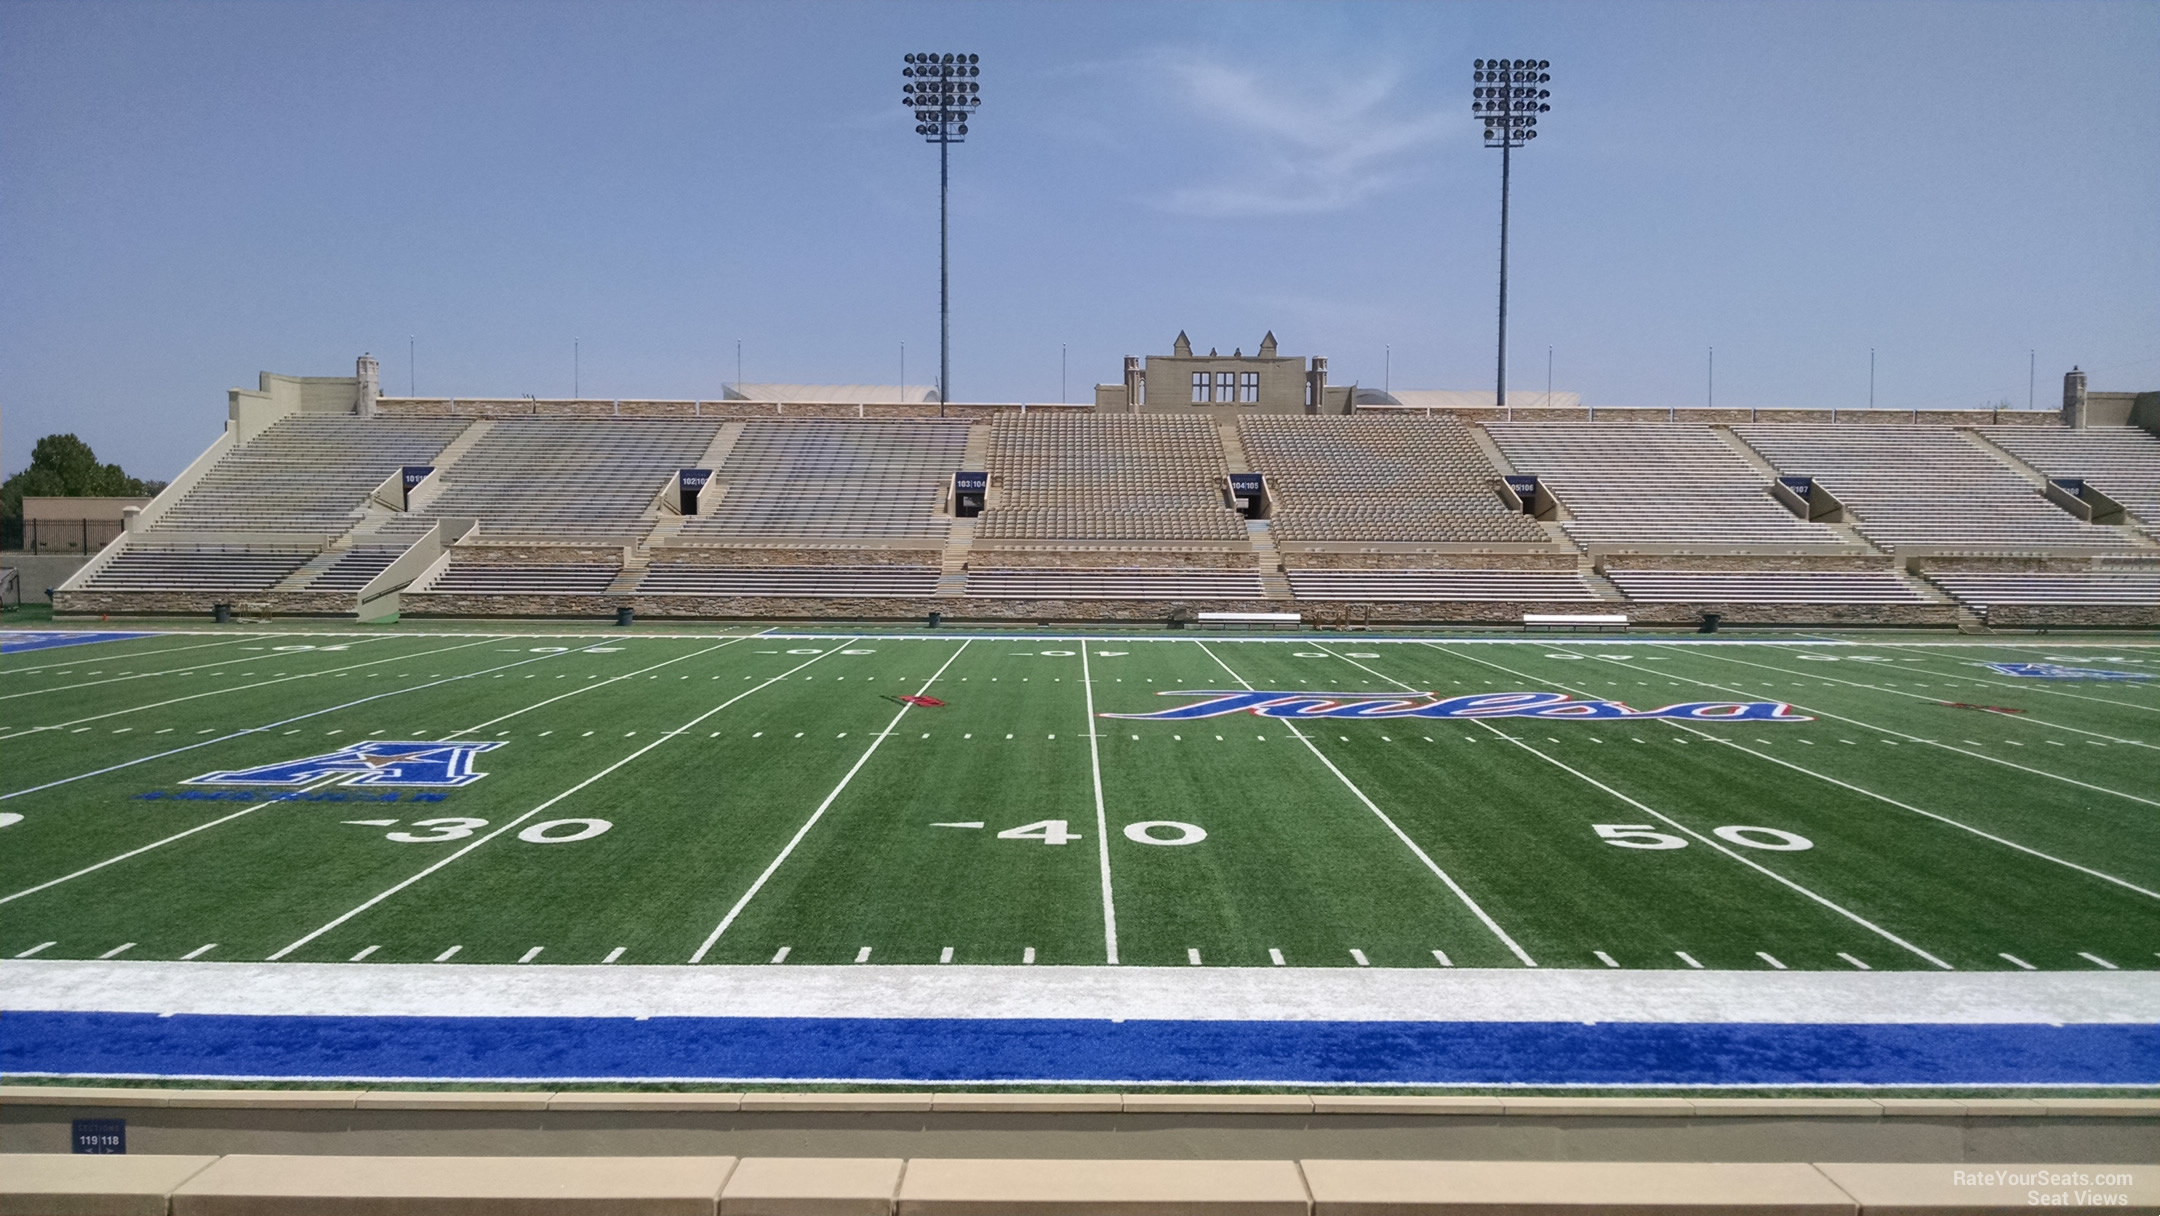 section 118, row 15 seat view  - h.a. chapman stadium